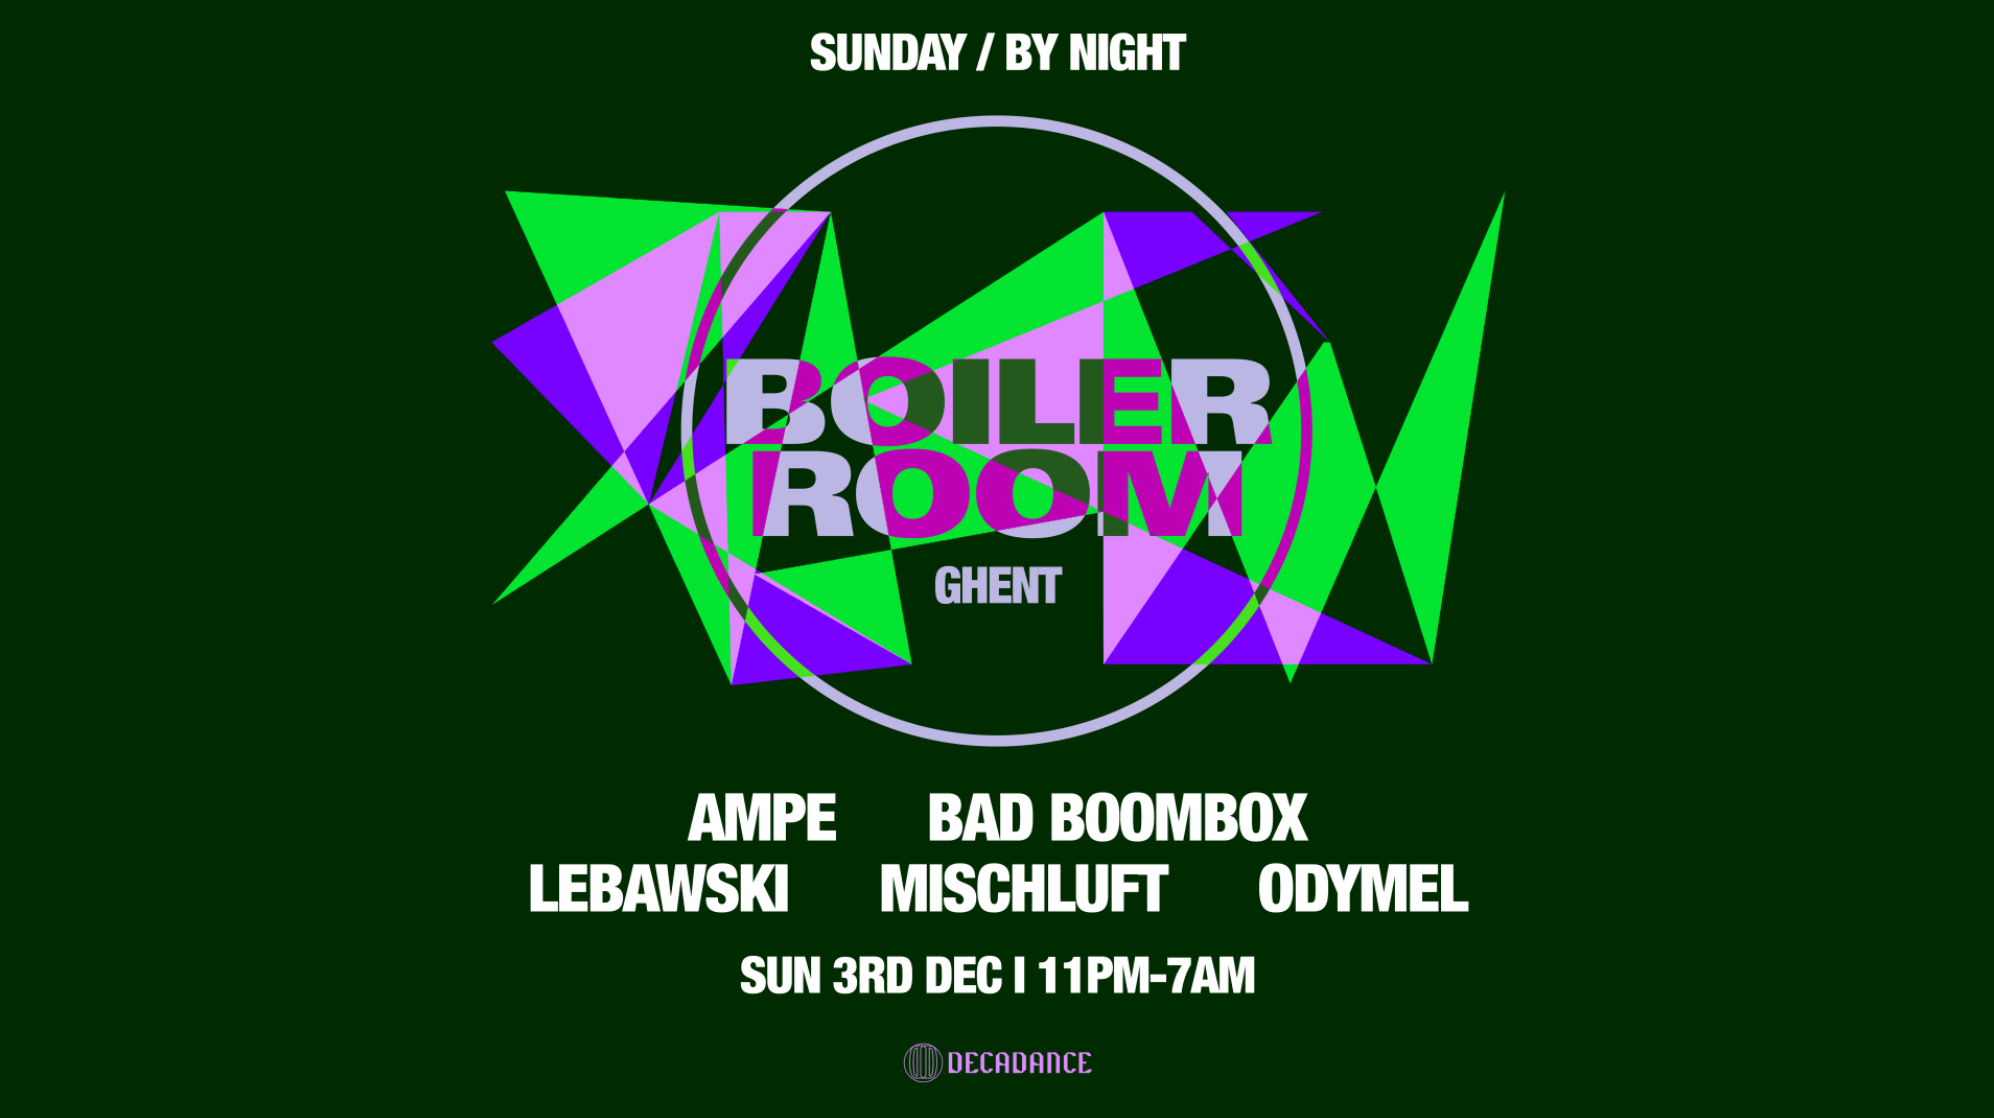 Boiler Room: Ghent Afterparties Sunday - フライヤー表